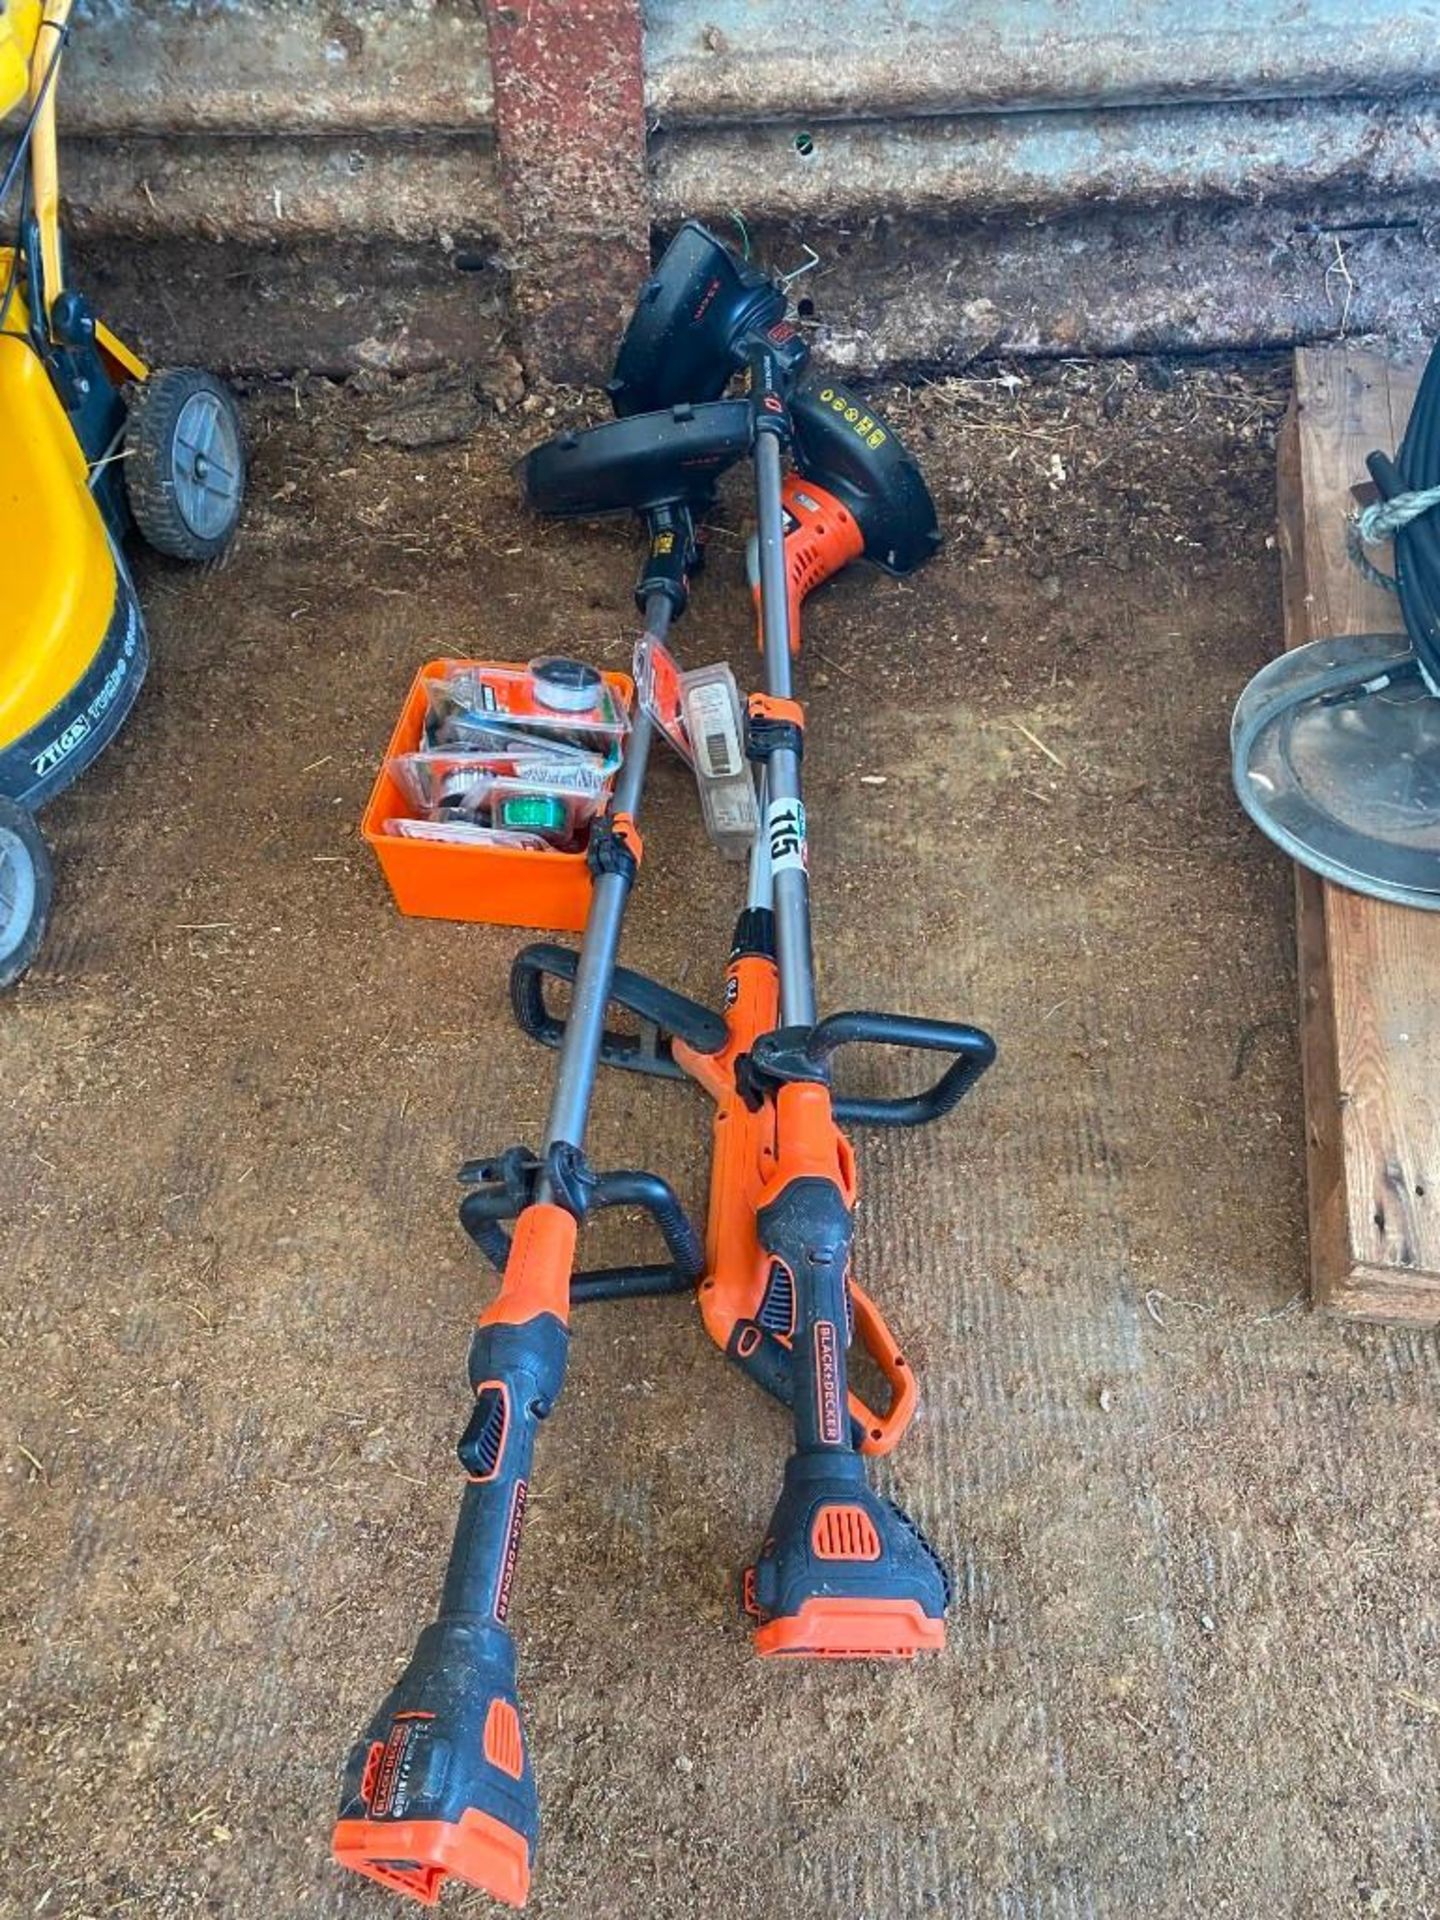 3 Black and decker electric strimers and wire